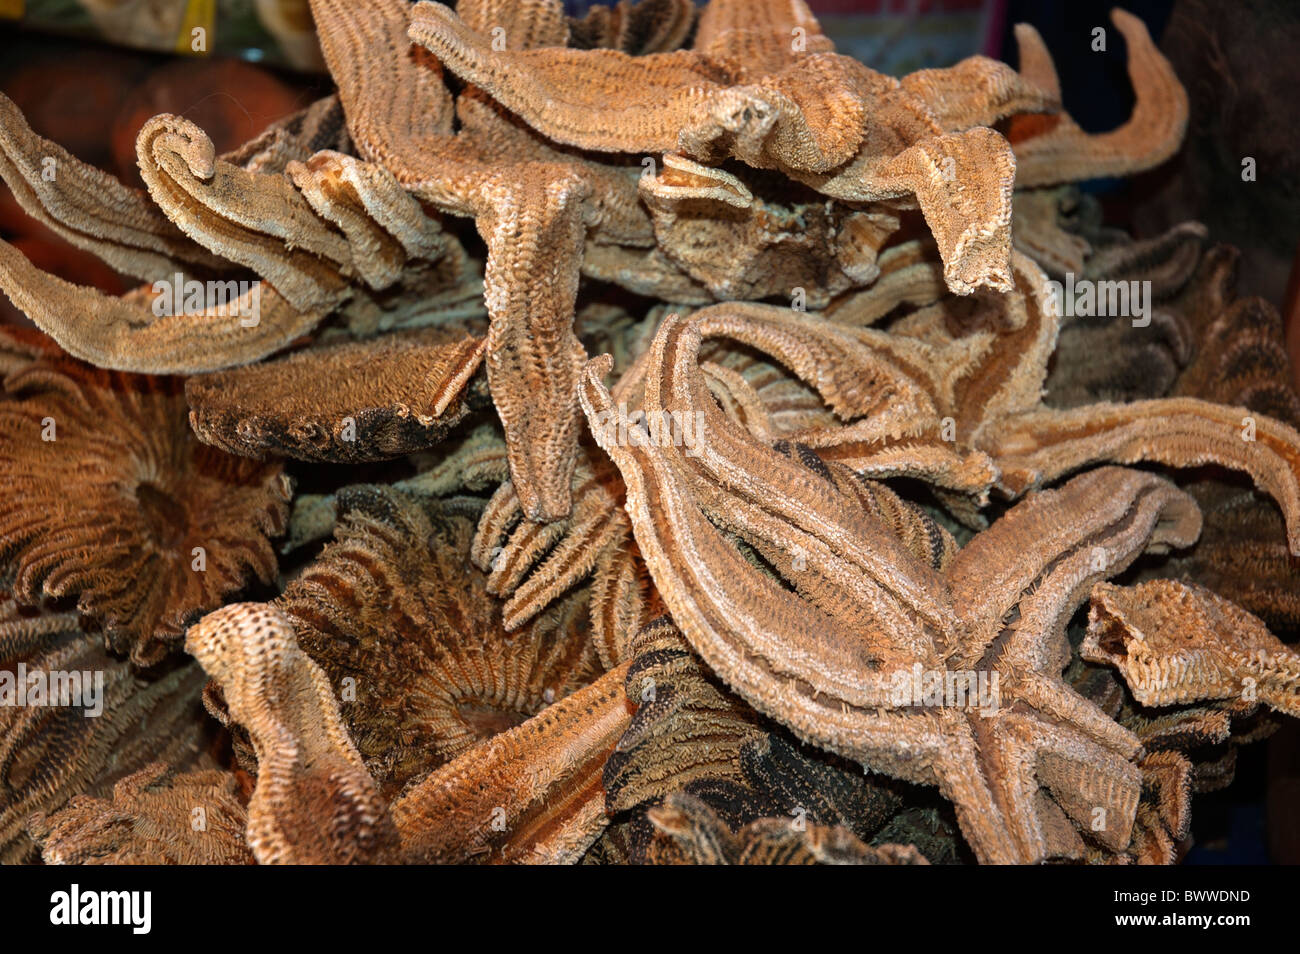 Dried starfish for sale for traditional medicine and magical rites, in the Witches Market, La Paz, Bolivia. Stock Photo